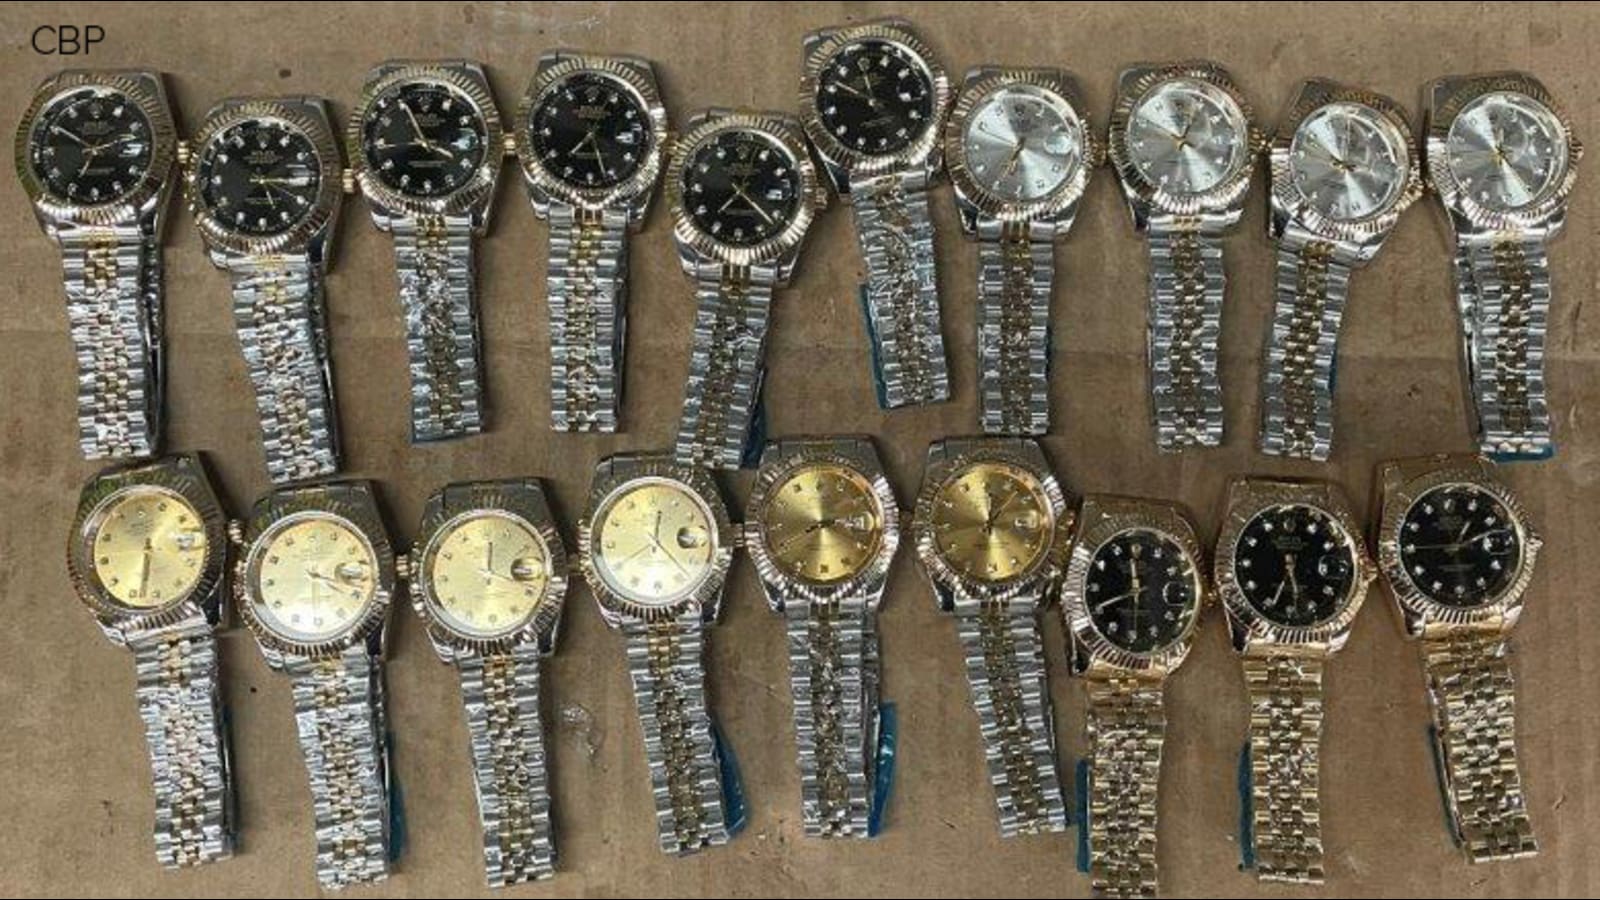 US Customs and Border Protection seize fake Rolex watches at JFK airport